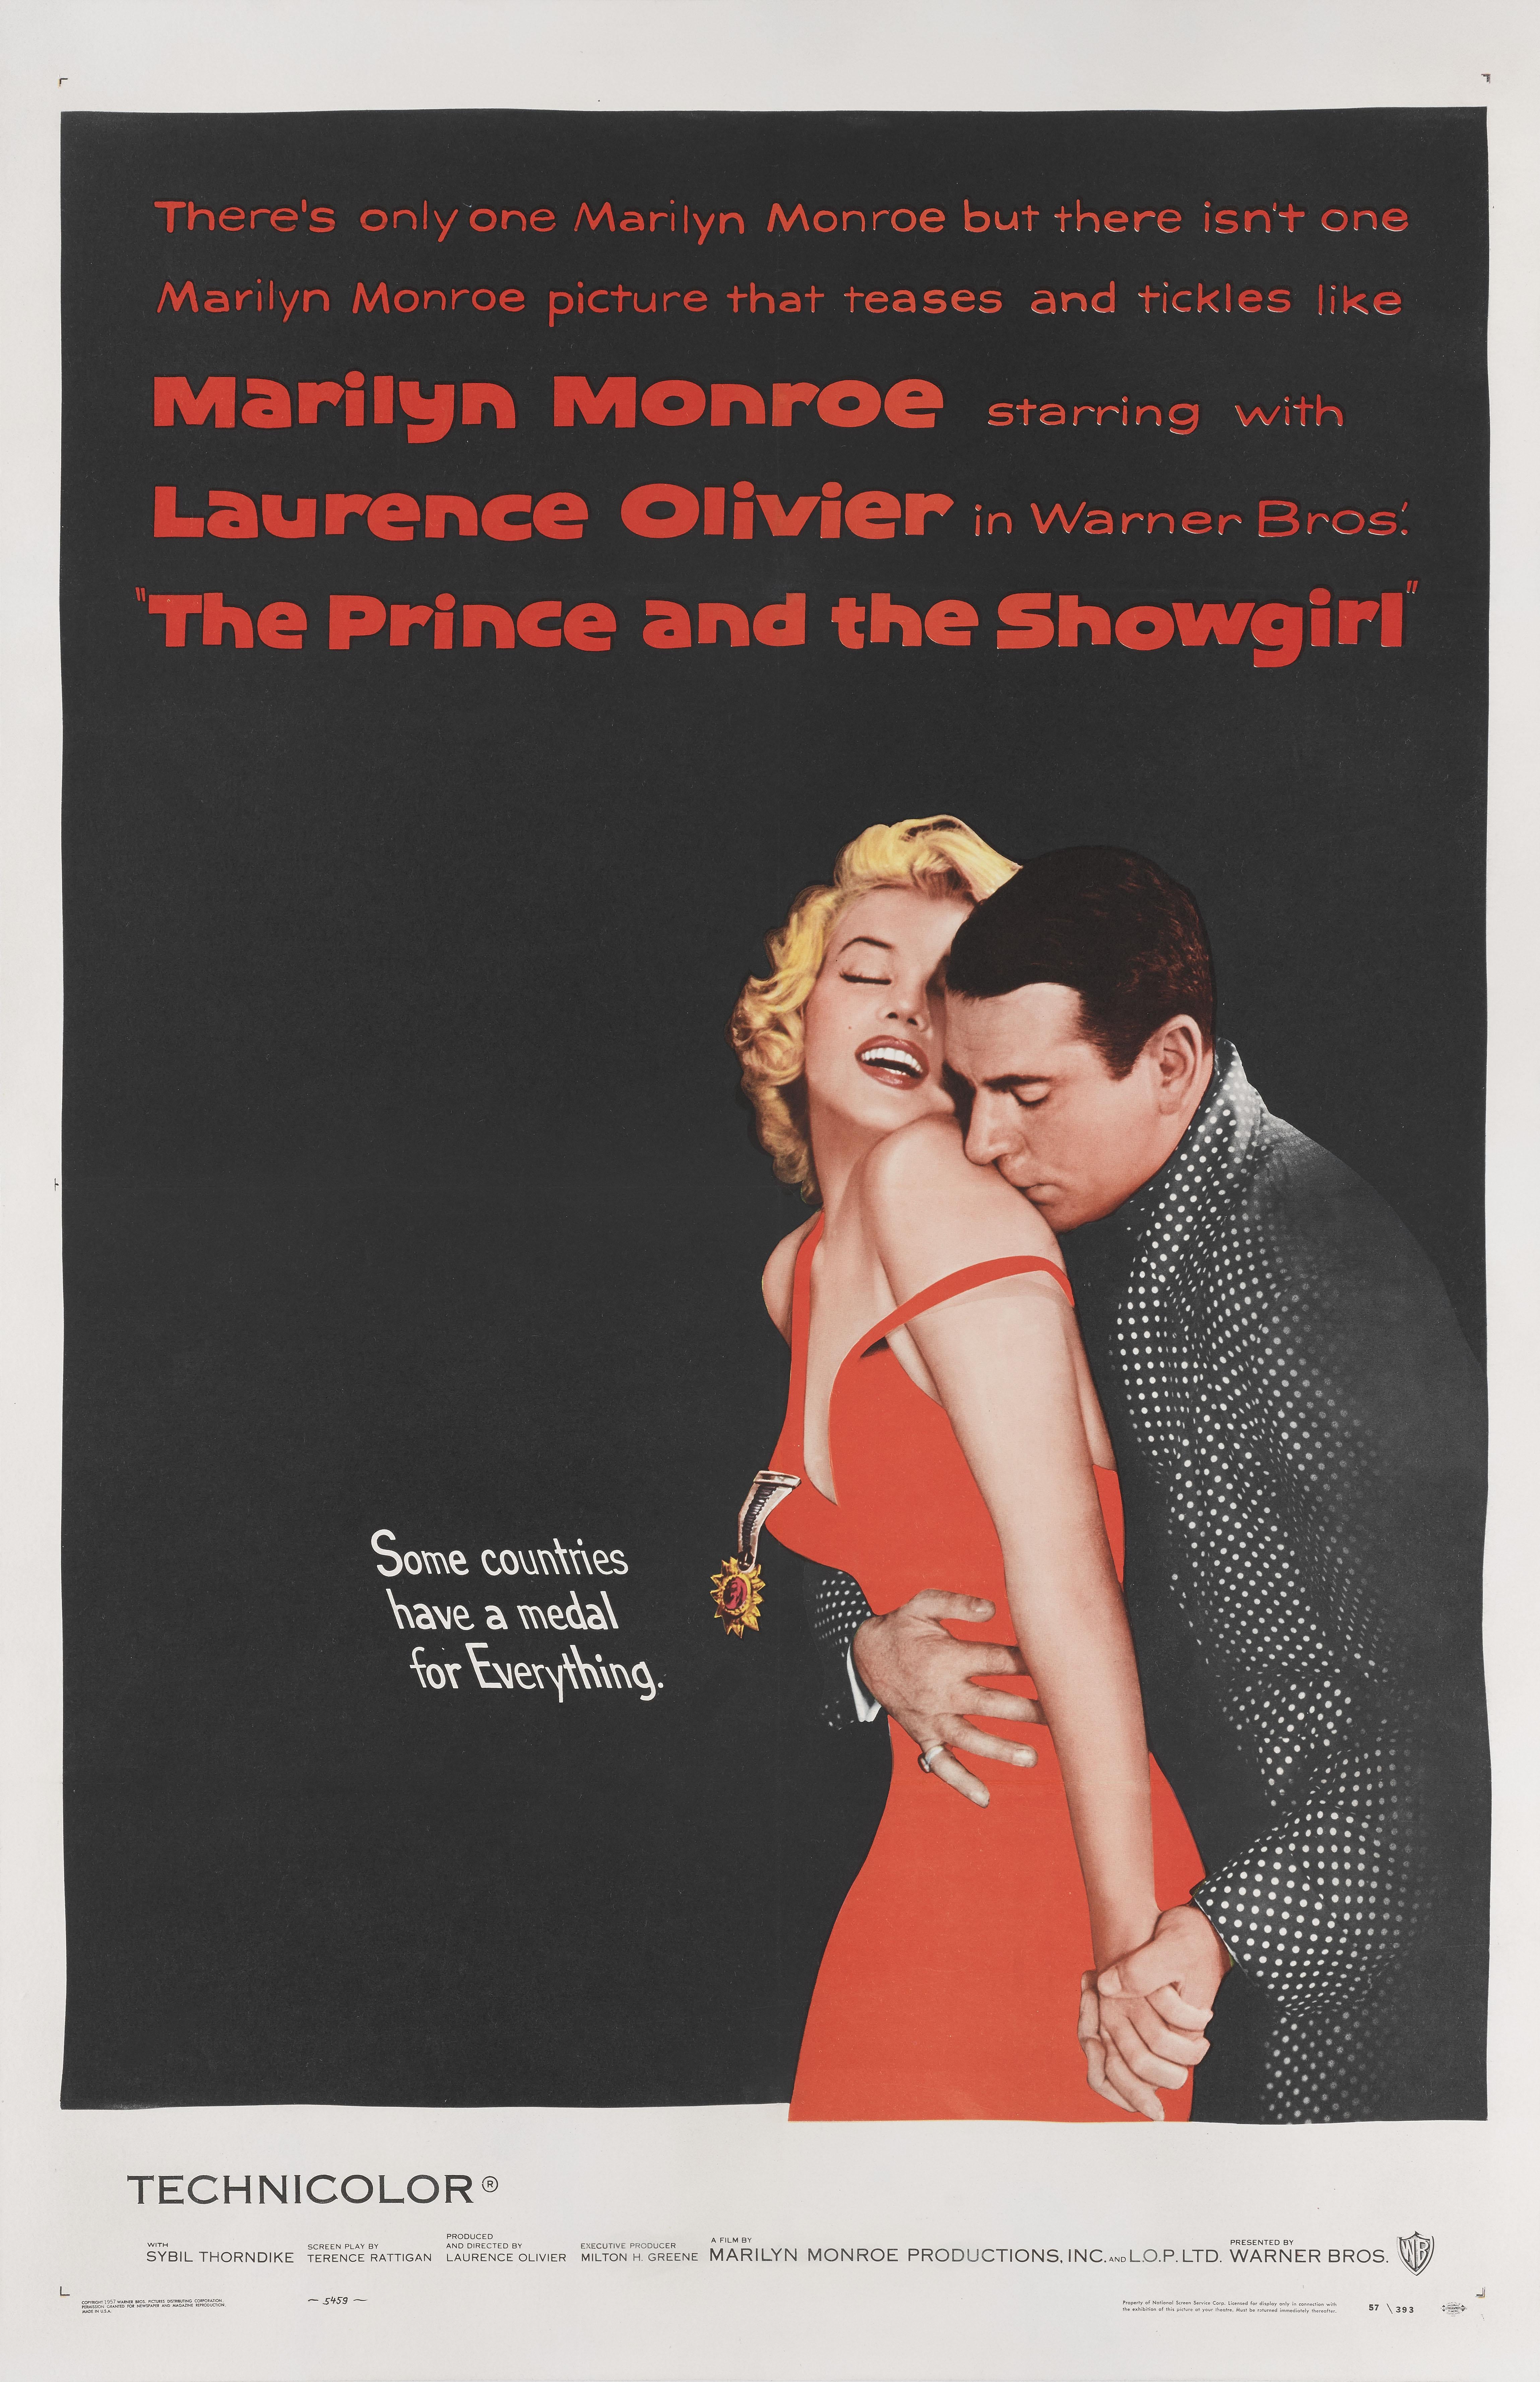 Original US film poster for Laurence Olivier’s 1957 romantic comedy starring
himself and Marilyn Monroe.
This poster is conservation linen backed.
This piece is in excellent condition, with the colour remaining very bright with only very minor